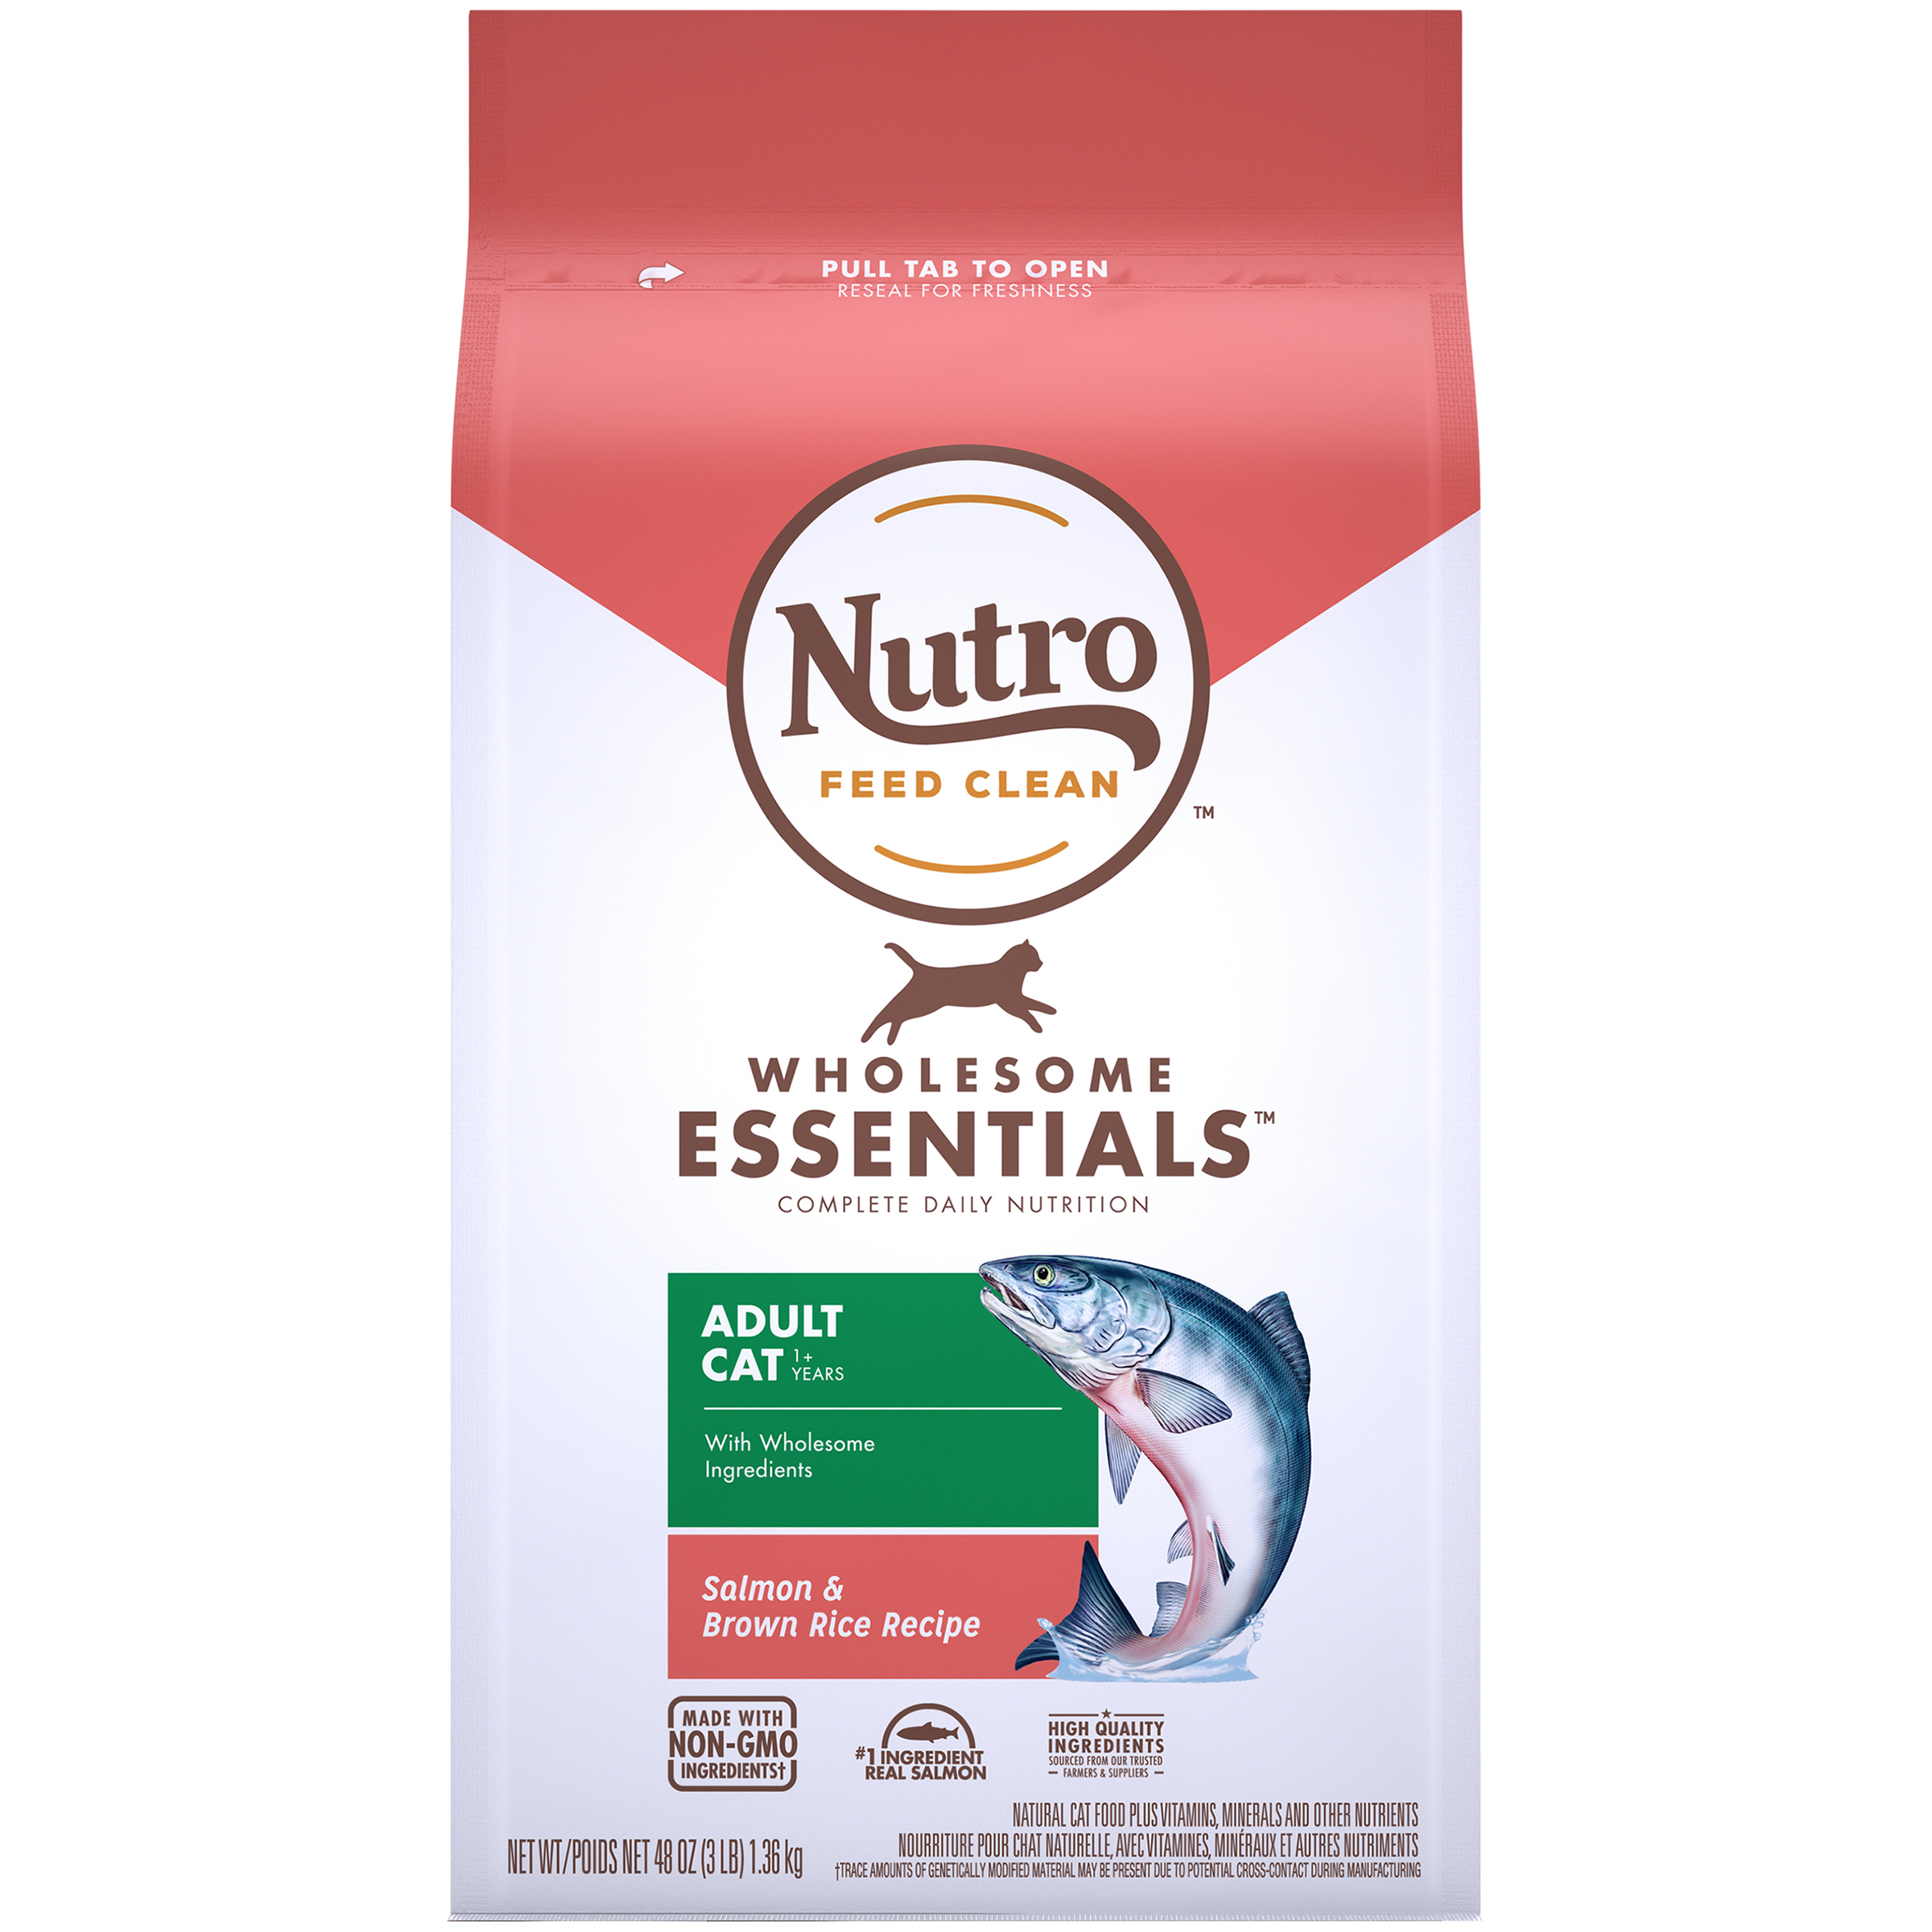 Nutro Wholesome Essentials Salmon & Brown Rice Recipe Adult Cat Food 3 lb.